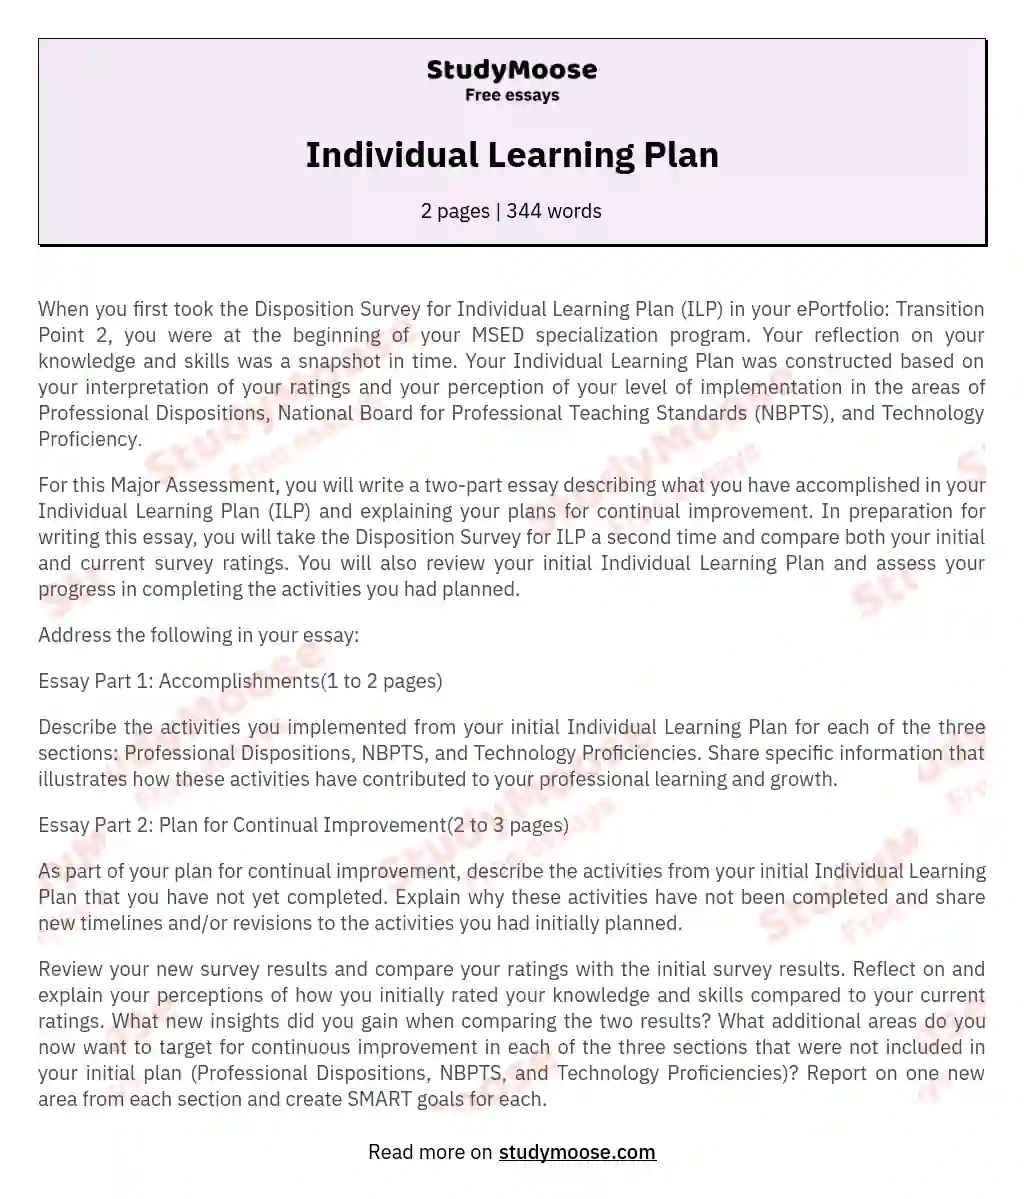 Individual Learning Plan essay